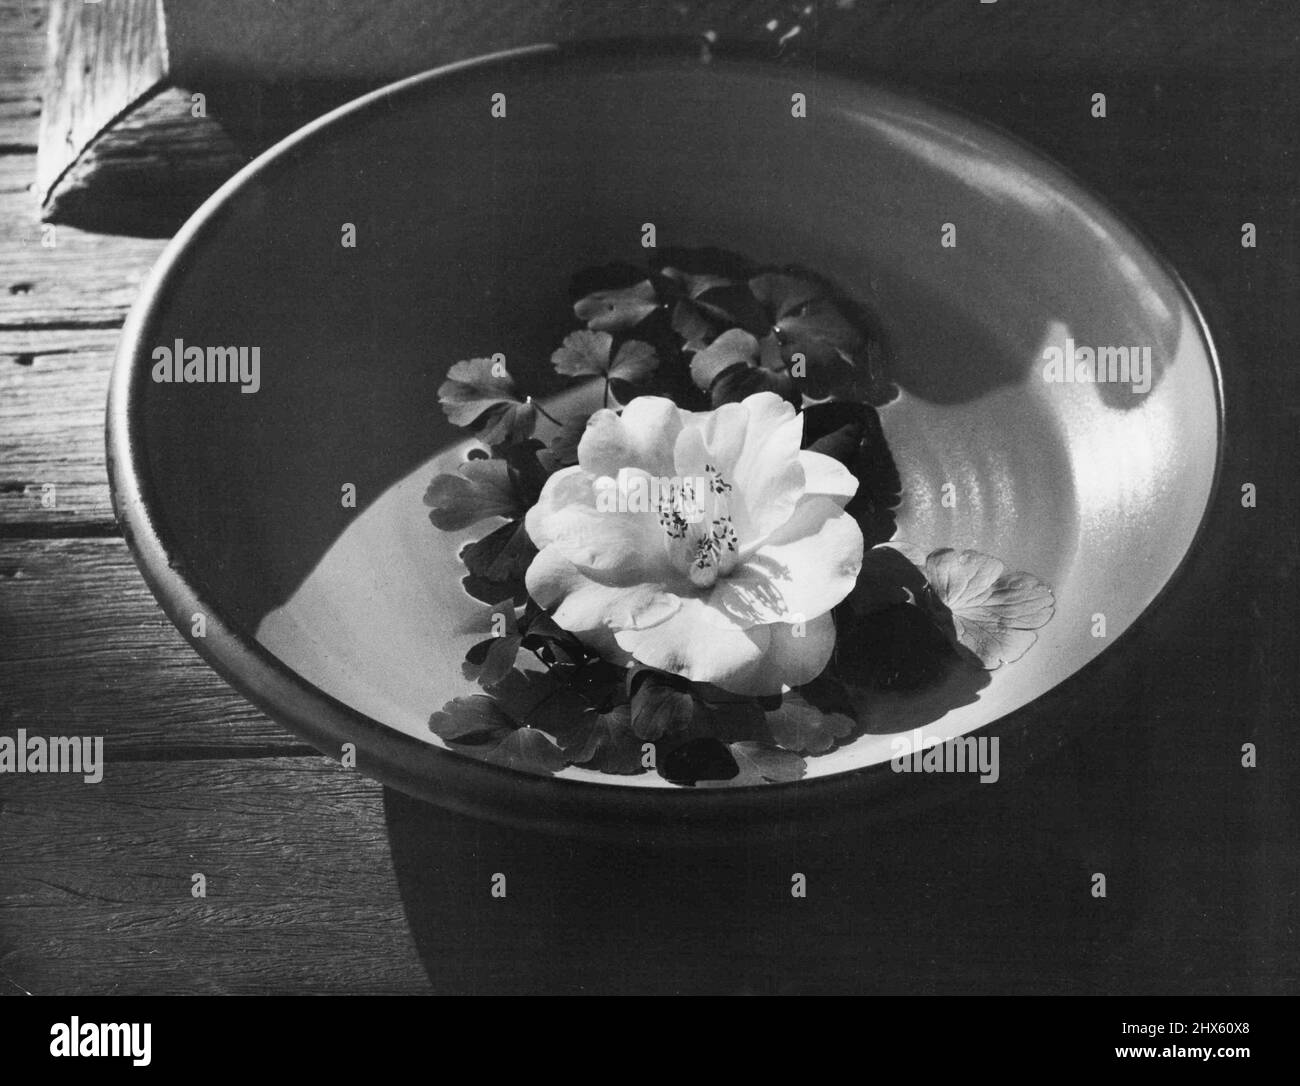 Camellia Cho Cho San welcomes the visitors at the door. Camellia Cho Cho San ('Madame Butterfly') in float bowl with aquilegia foliage placed as a welcome to visitors at the front door. September 07, 1955. Stock Photo